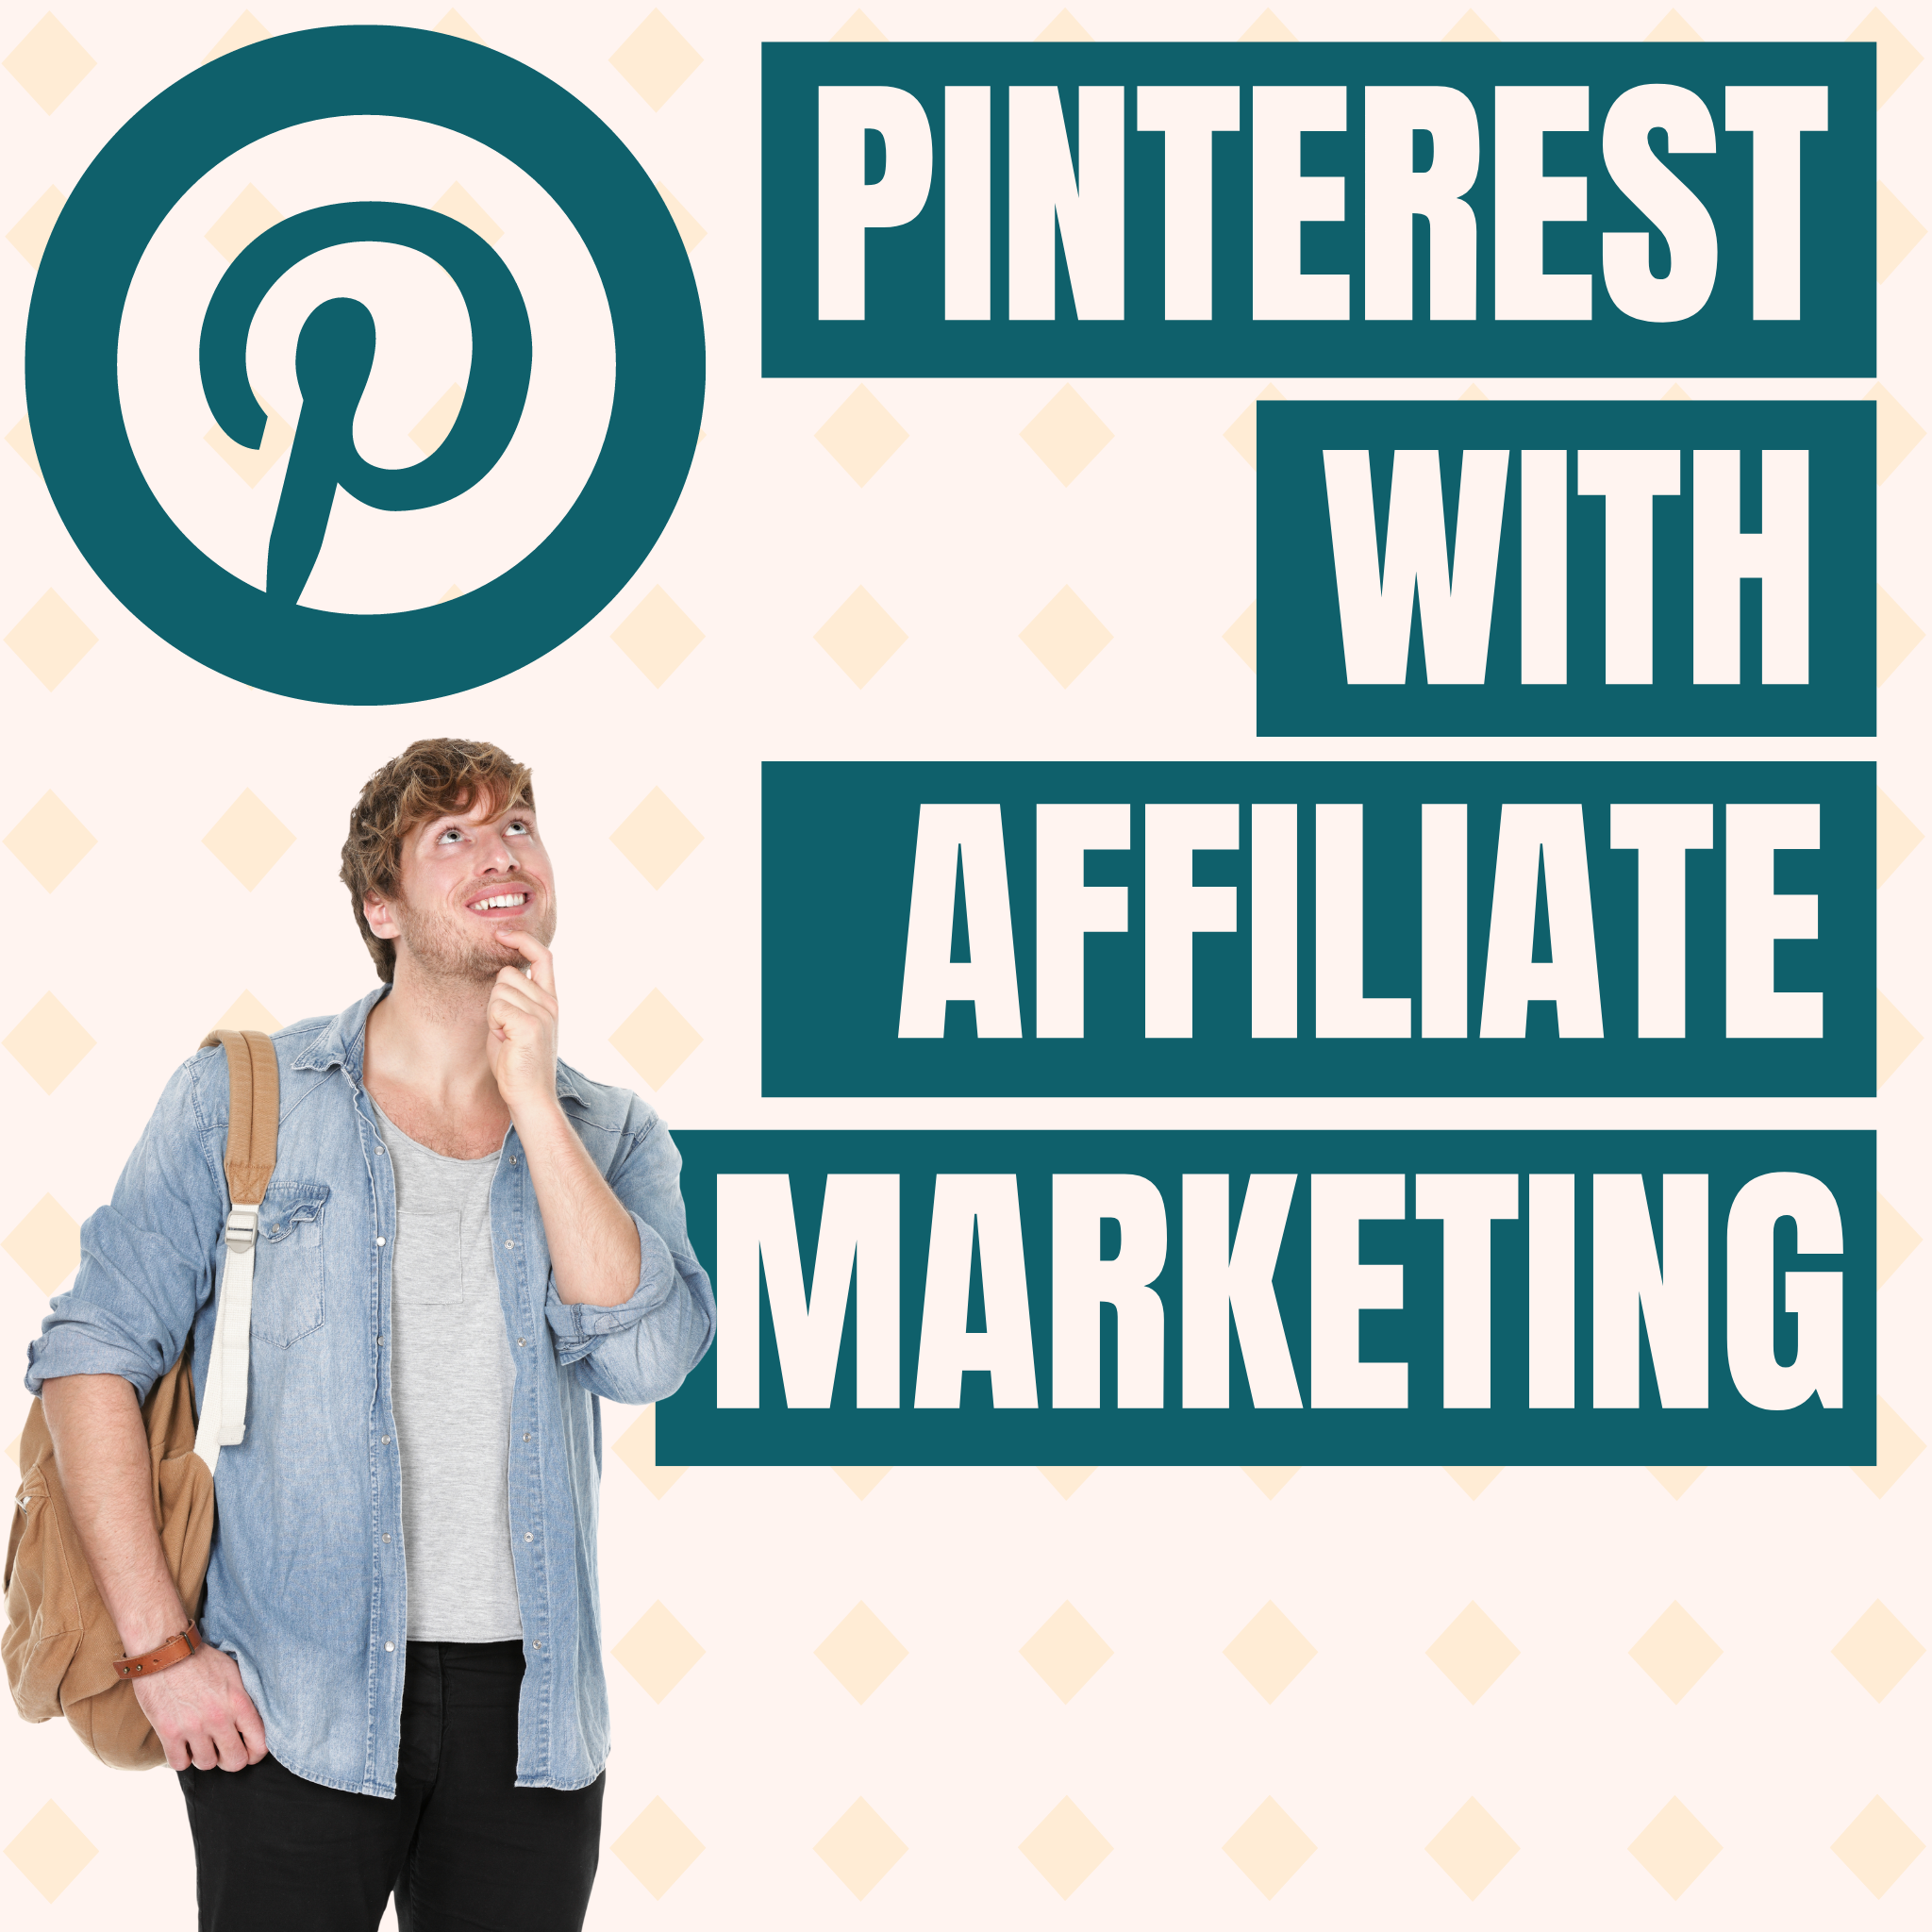 Power of Pinterest with Affiliate Marketing